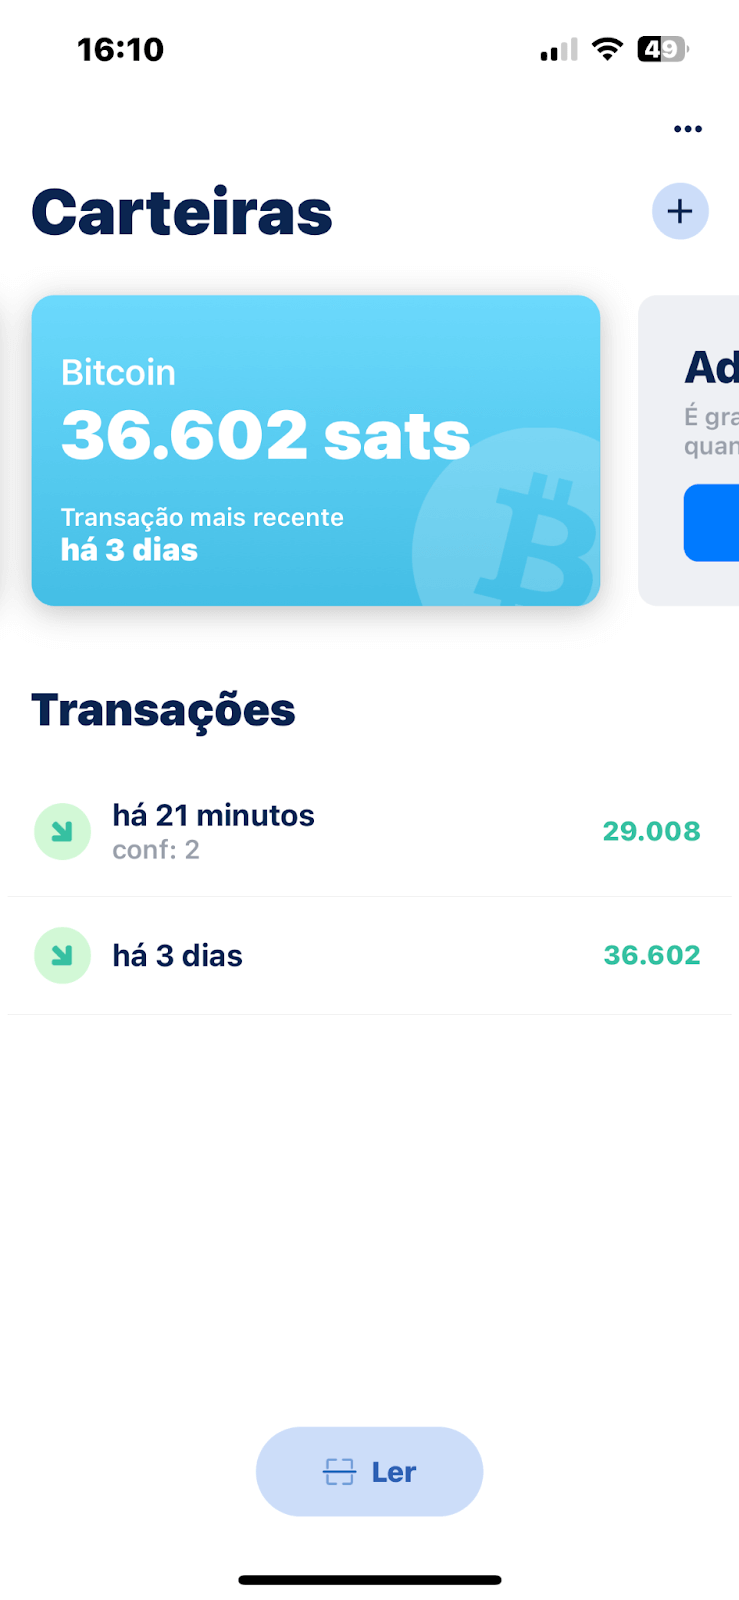 Carteiras On Chain na Blue Wallet